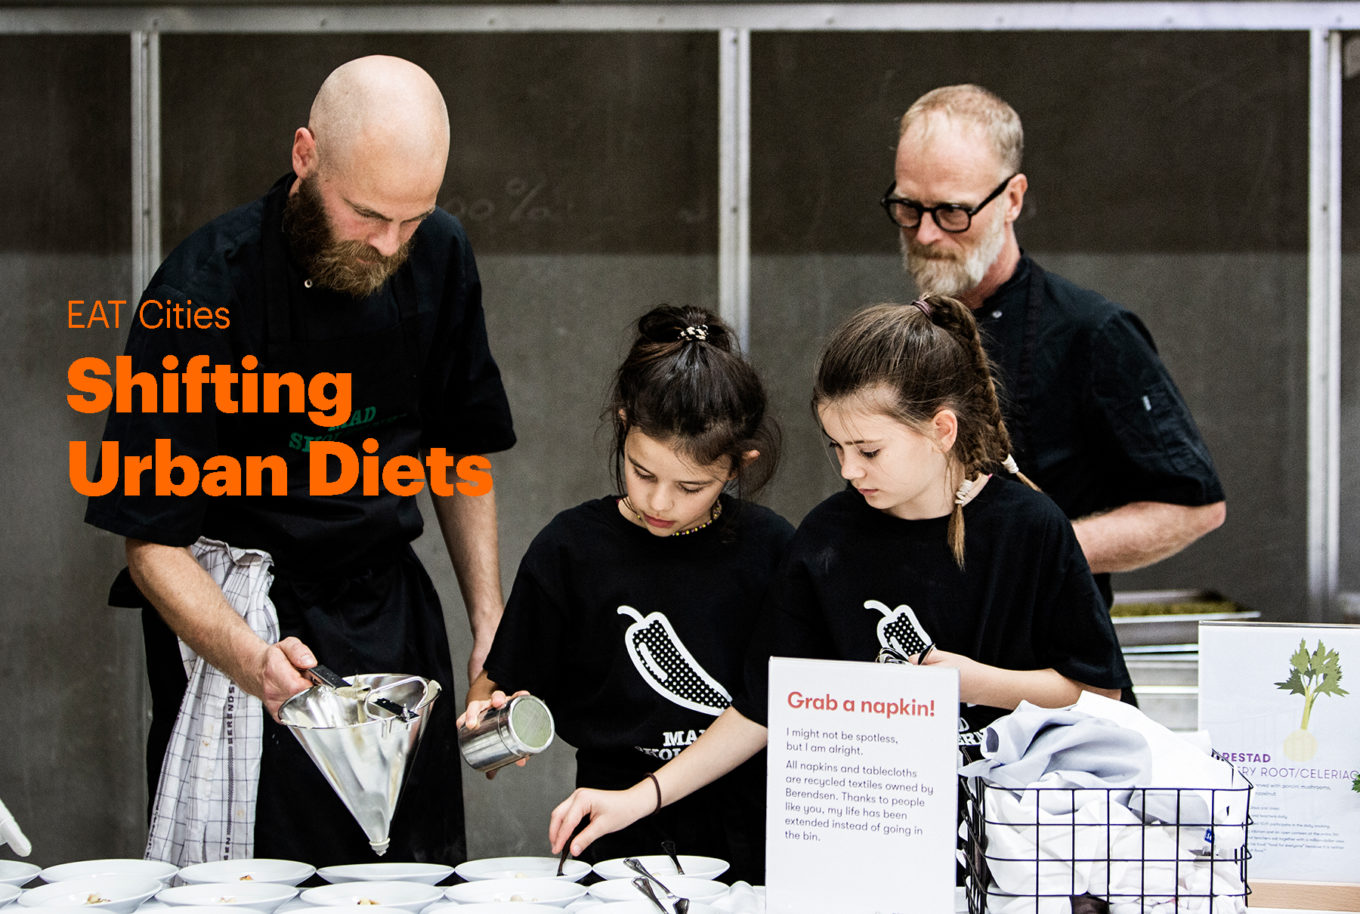 EAT Cities, Shifting Urban Diets Initiative. Chefs and children cooking food in a kitchen.